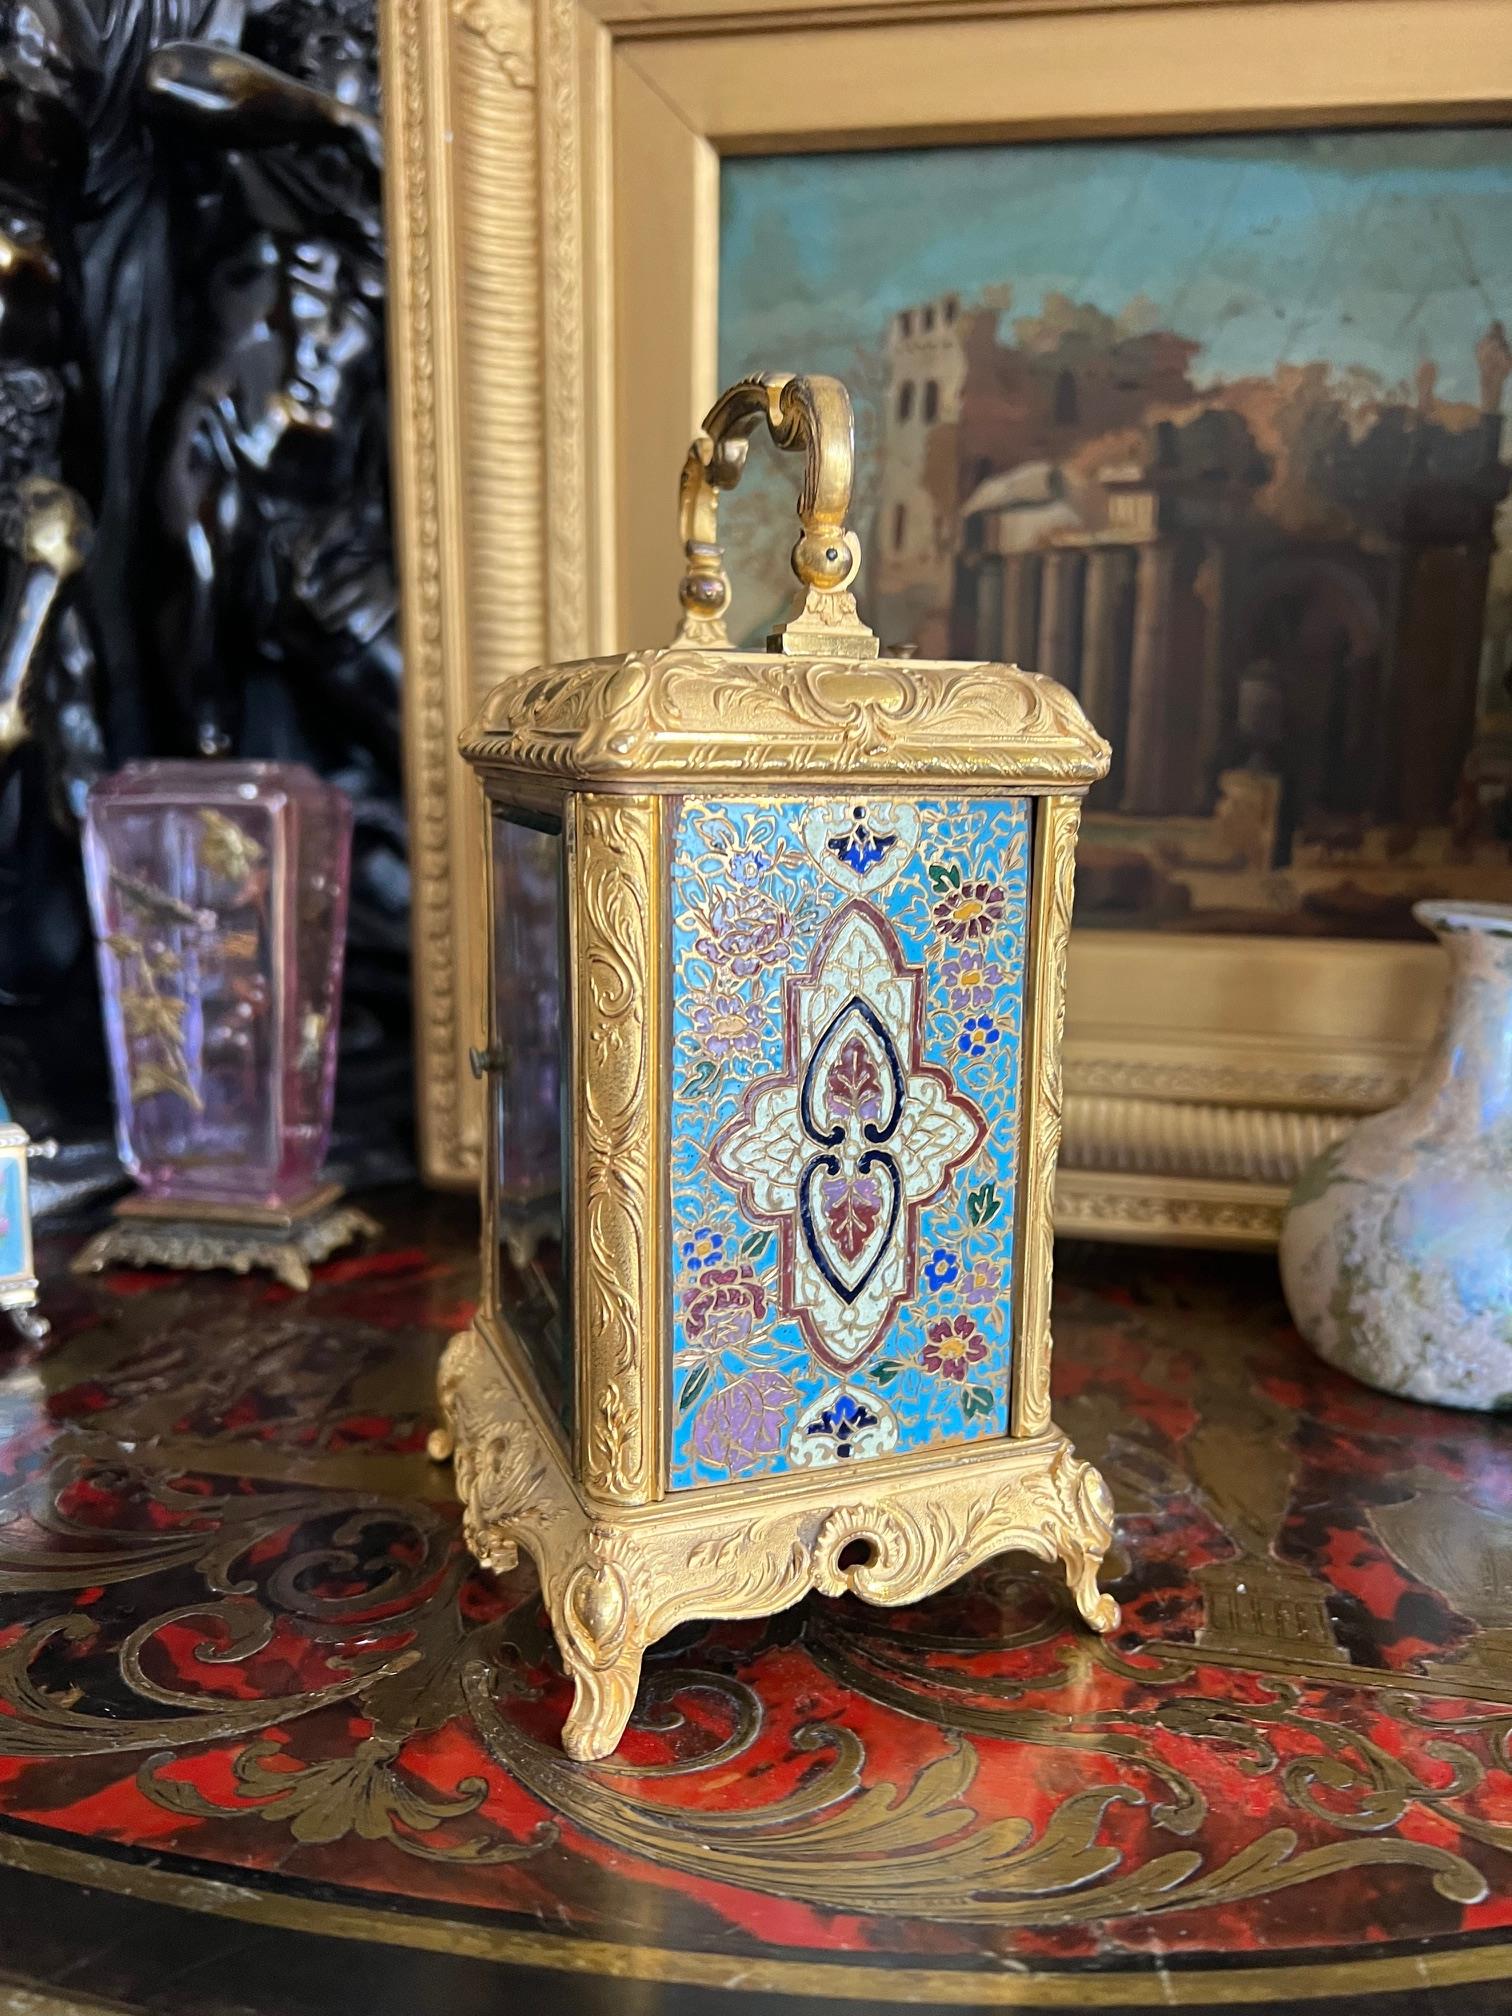 A FINE LATE 19TH CENTURY FRENCH GILT BRASS AND CLOISONNE ENAMEL CARRIAGE CLOCK - Image 8 of 8